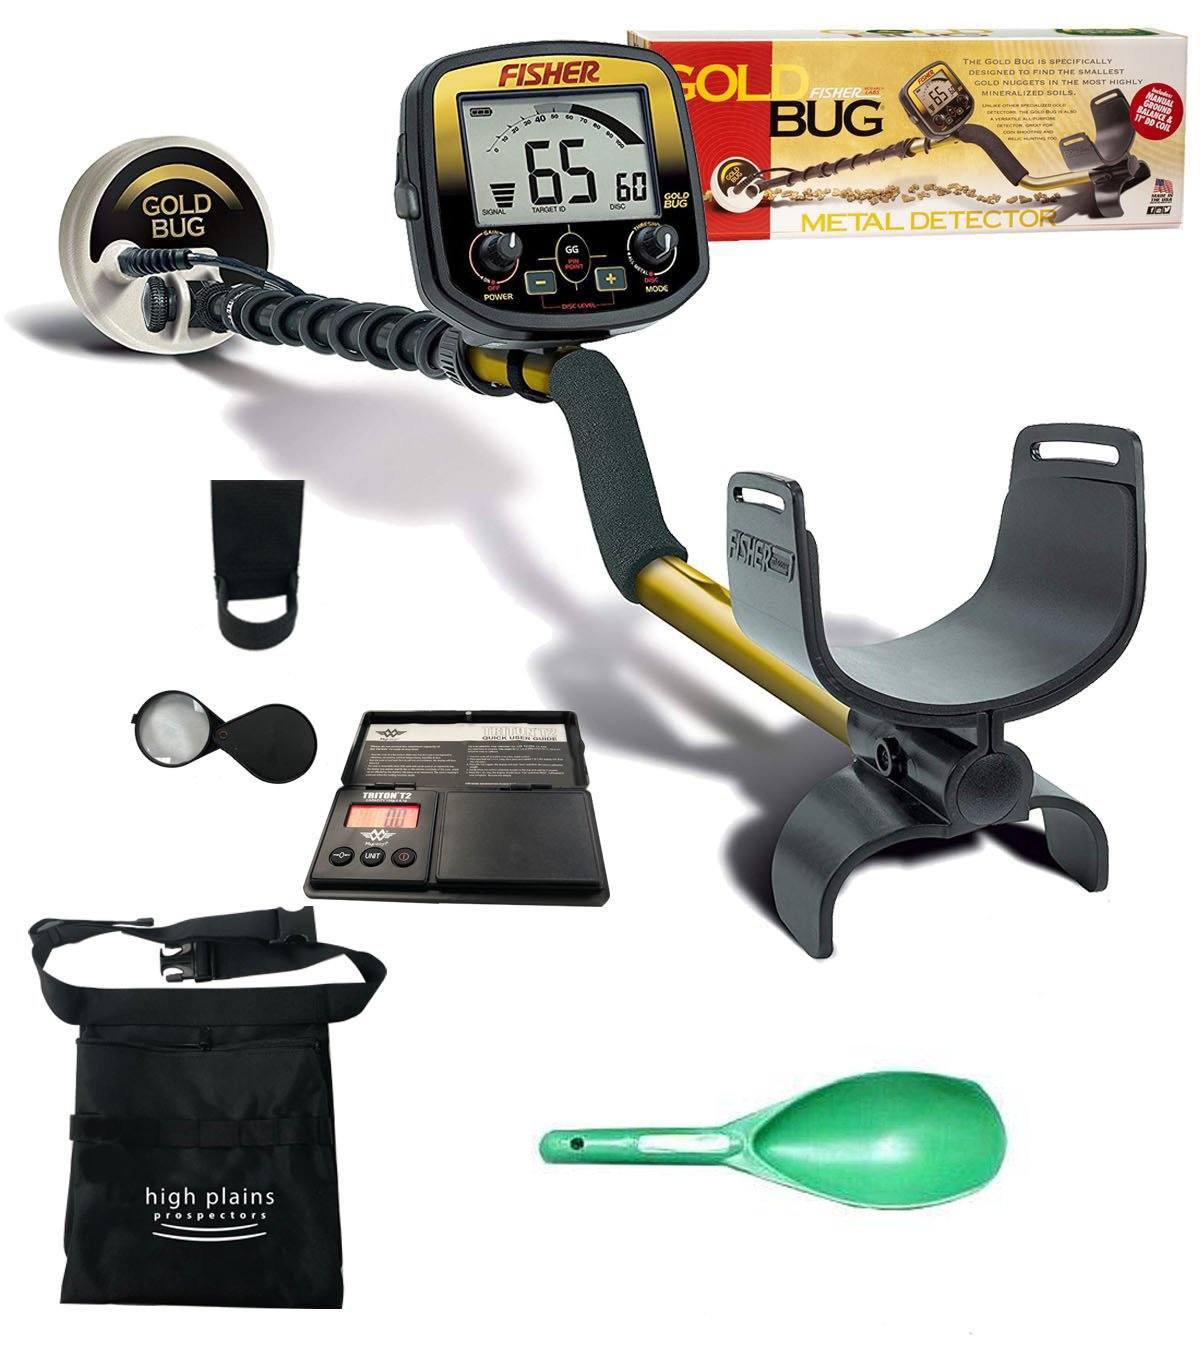 Fisher Gold Bug Metal Detector Bundle with Gear